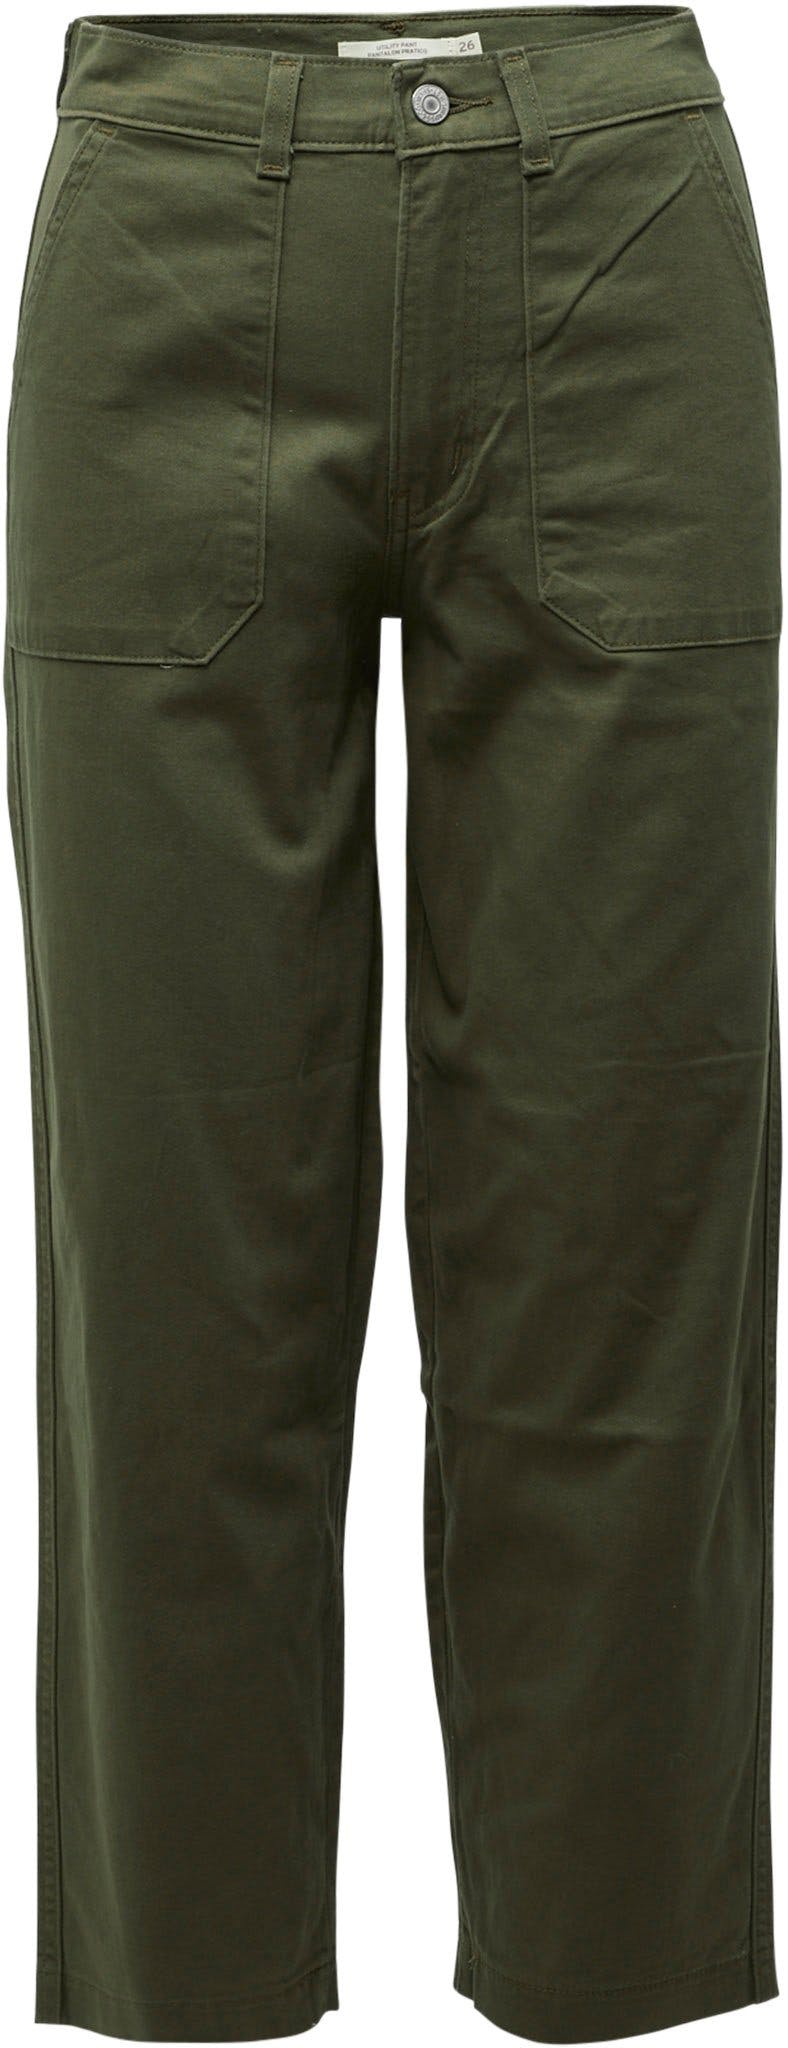 Product image for ND Utility Pant - Women's